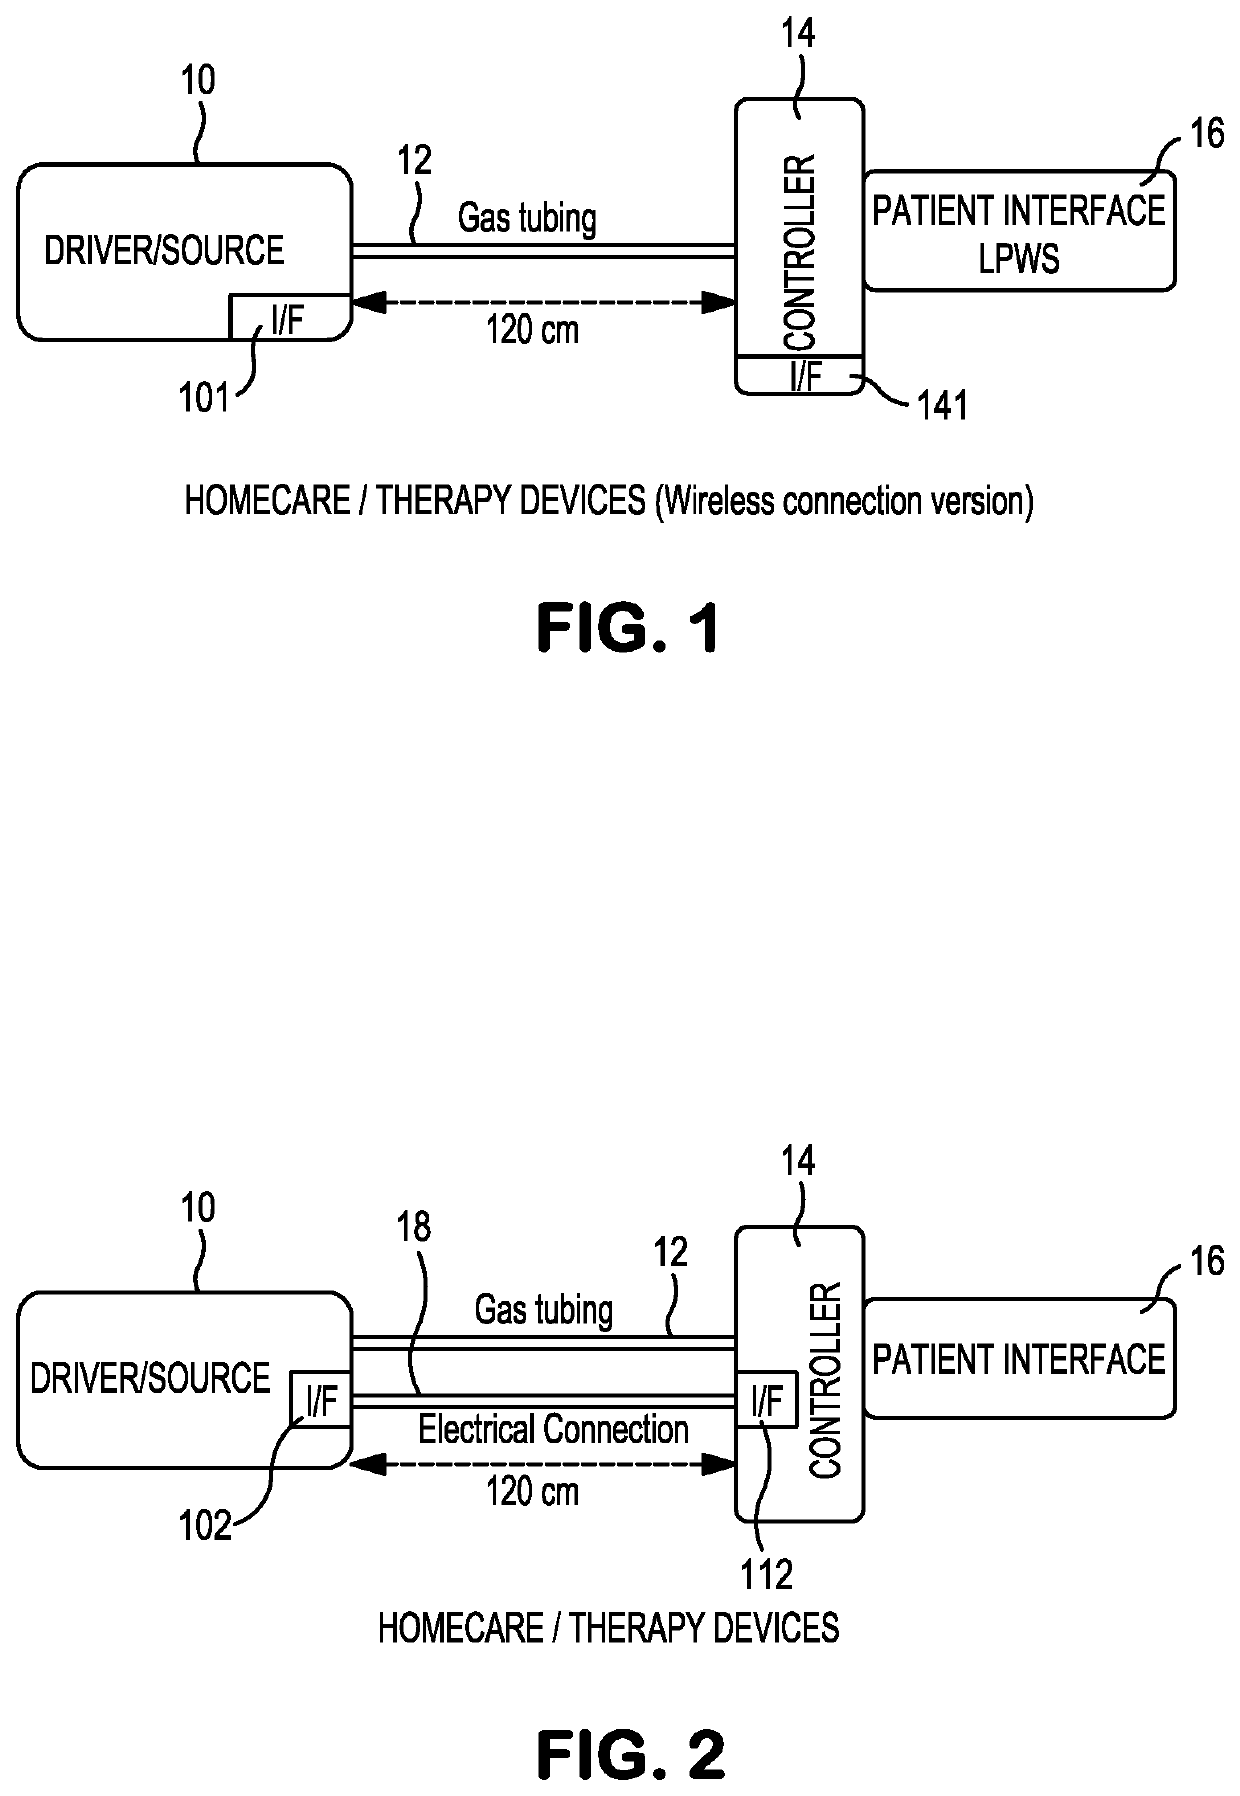 Method and apparatus for providing percussive ventilation therapy to a patient airway